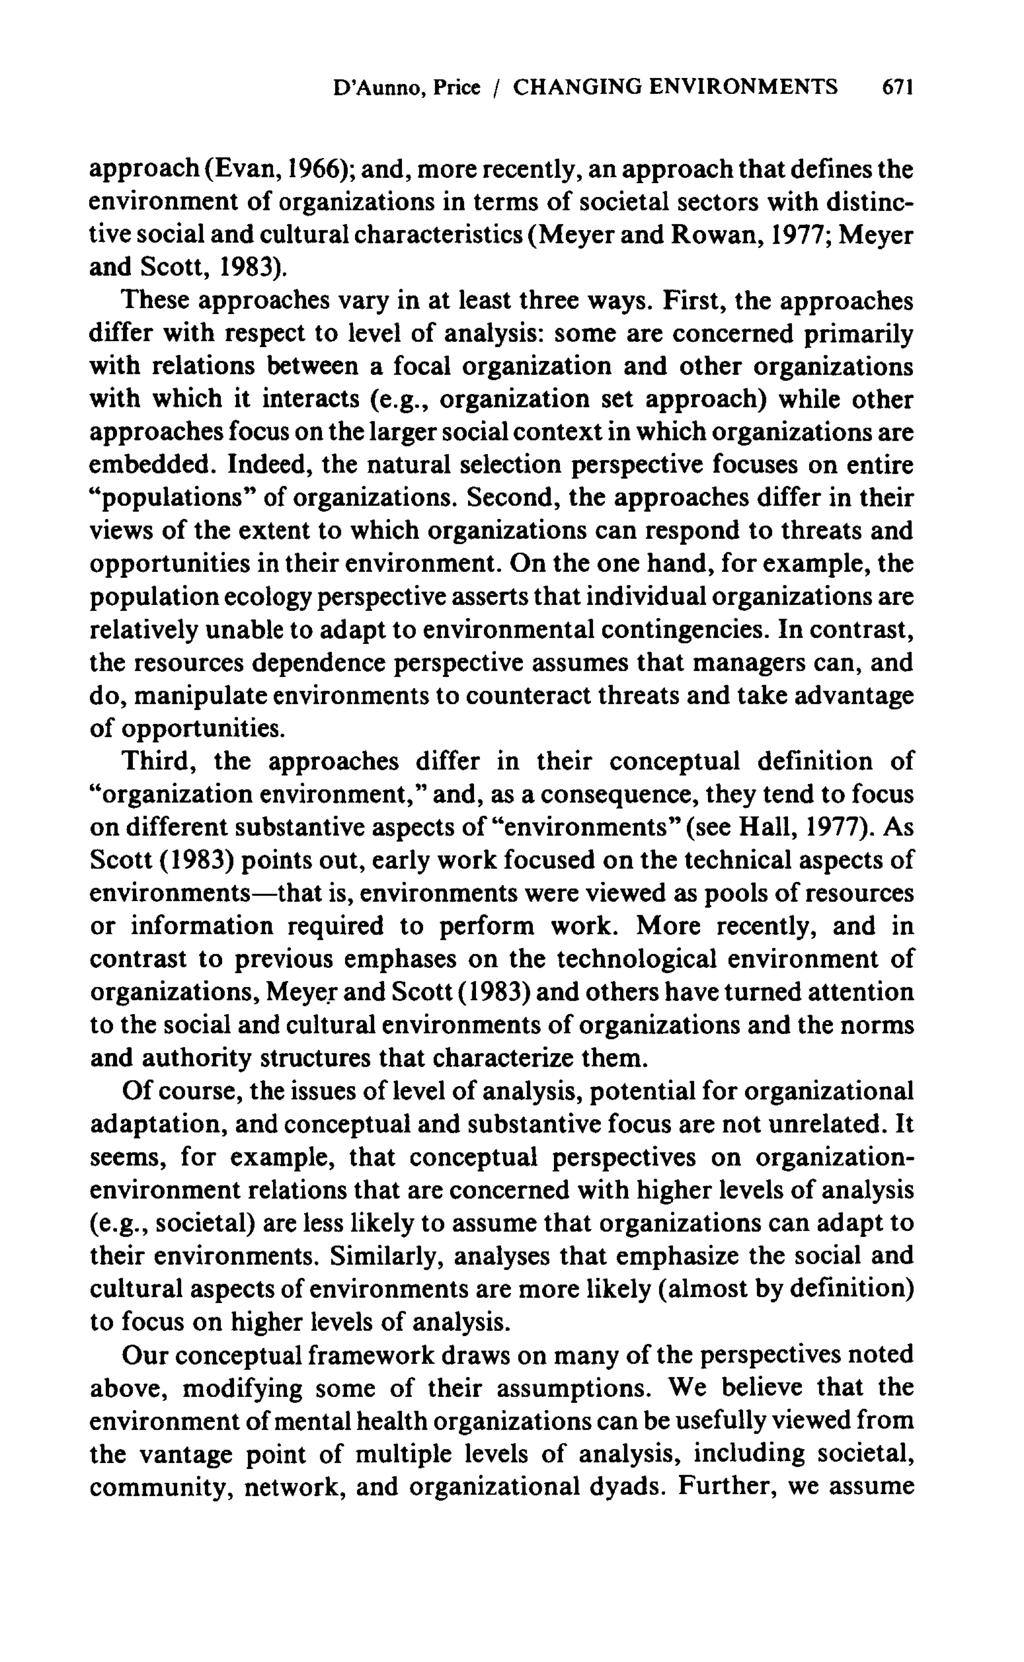 671 approach (Evan, 1966); and, more recently, an approach that defines the environment of organizations in terms of societal sectors with distinctive social and cultural characteristics (Meyer and